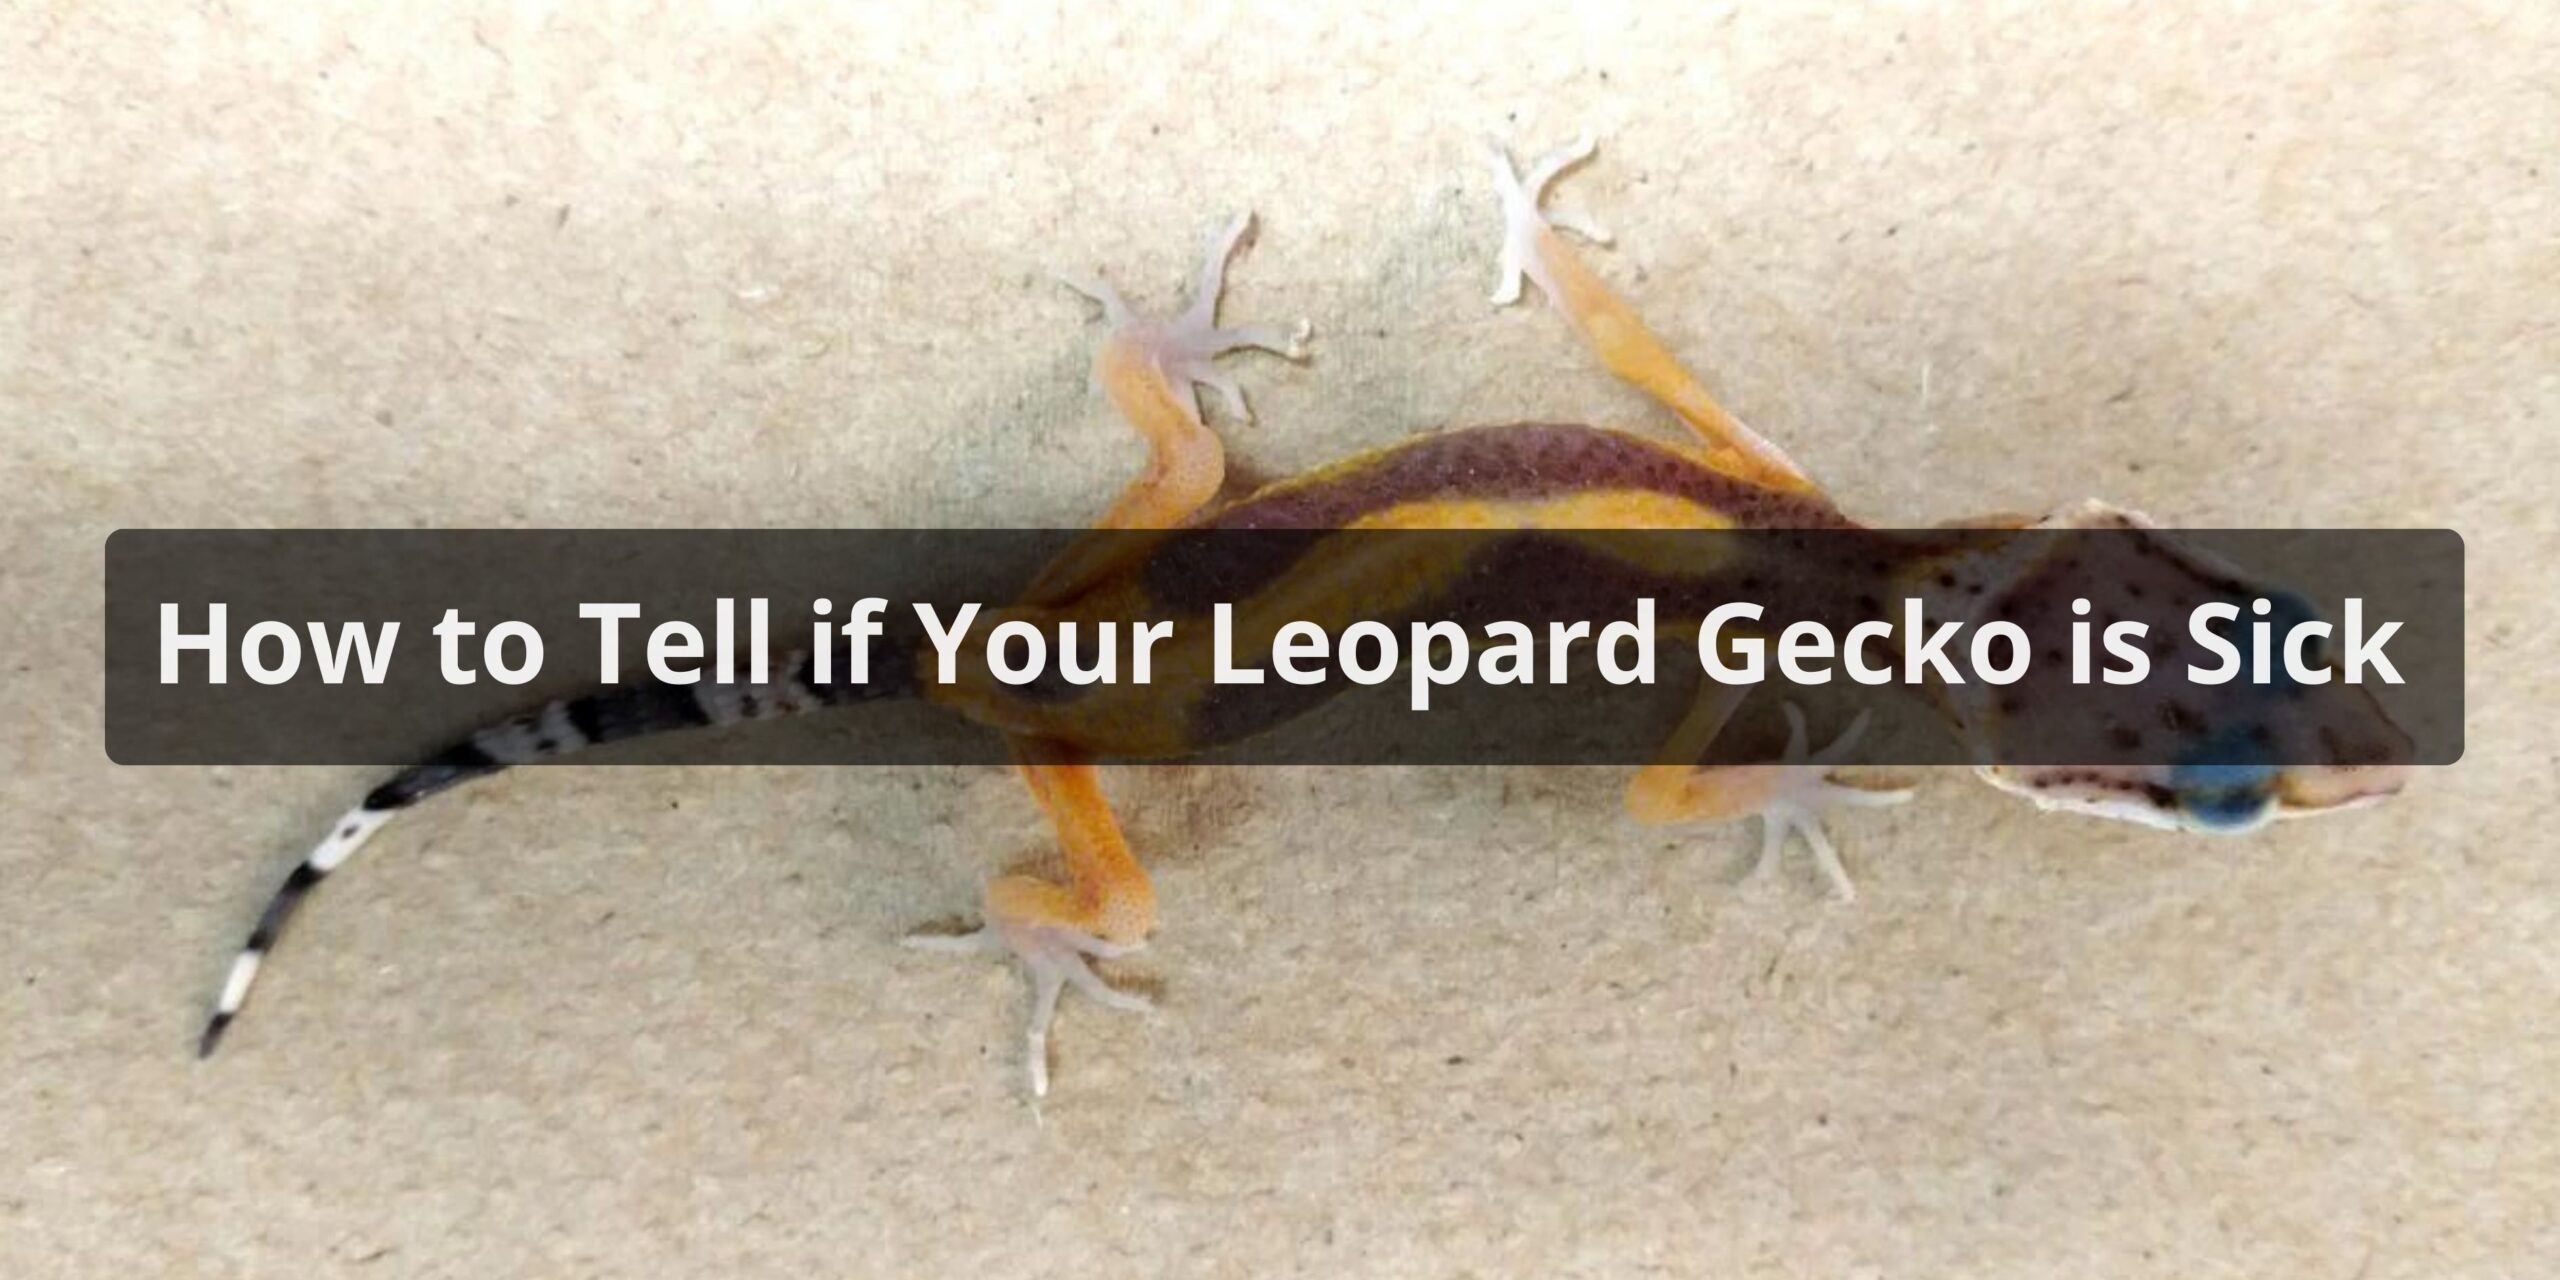 How to Tell if Your Leopard Gecko is Sick